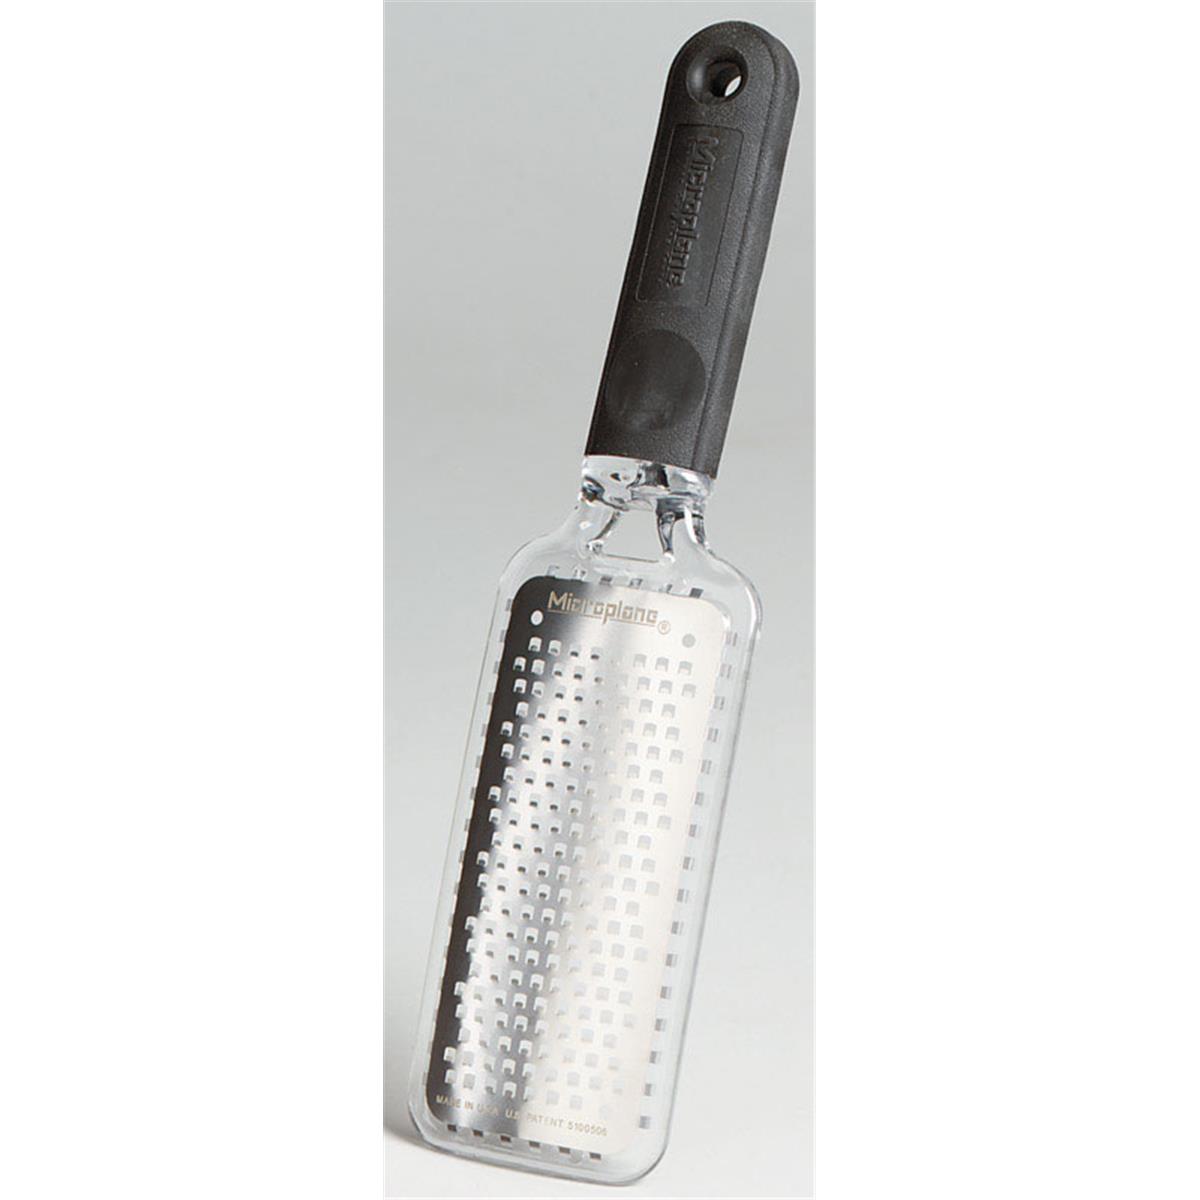 6102495 Microplane Stainless Steel Large Grater, Silver & Black